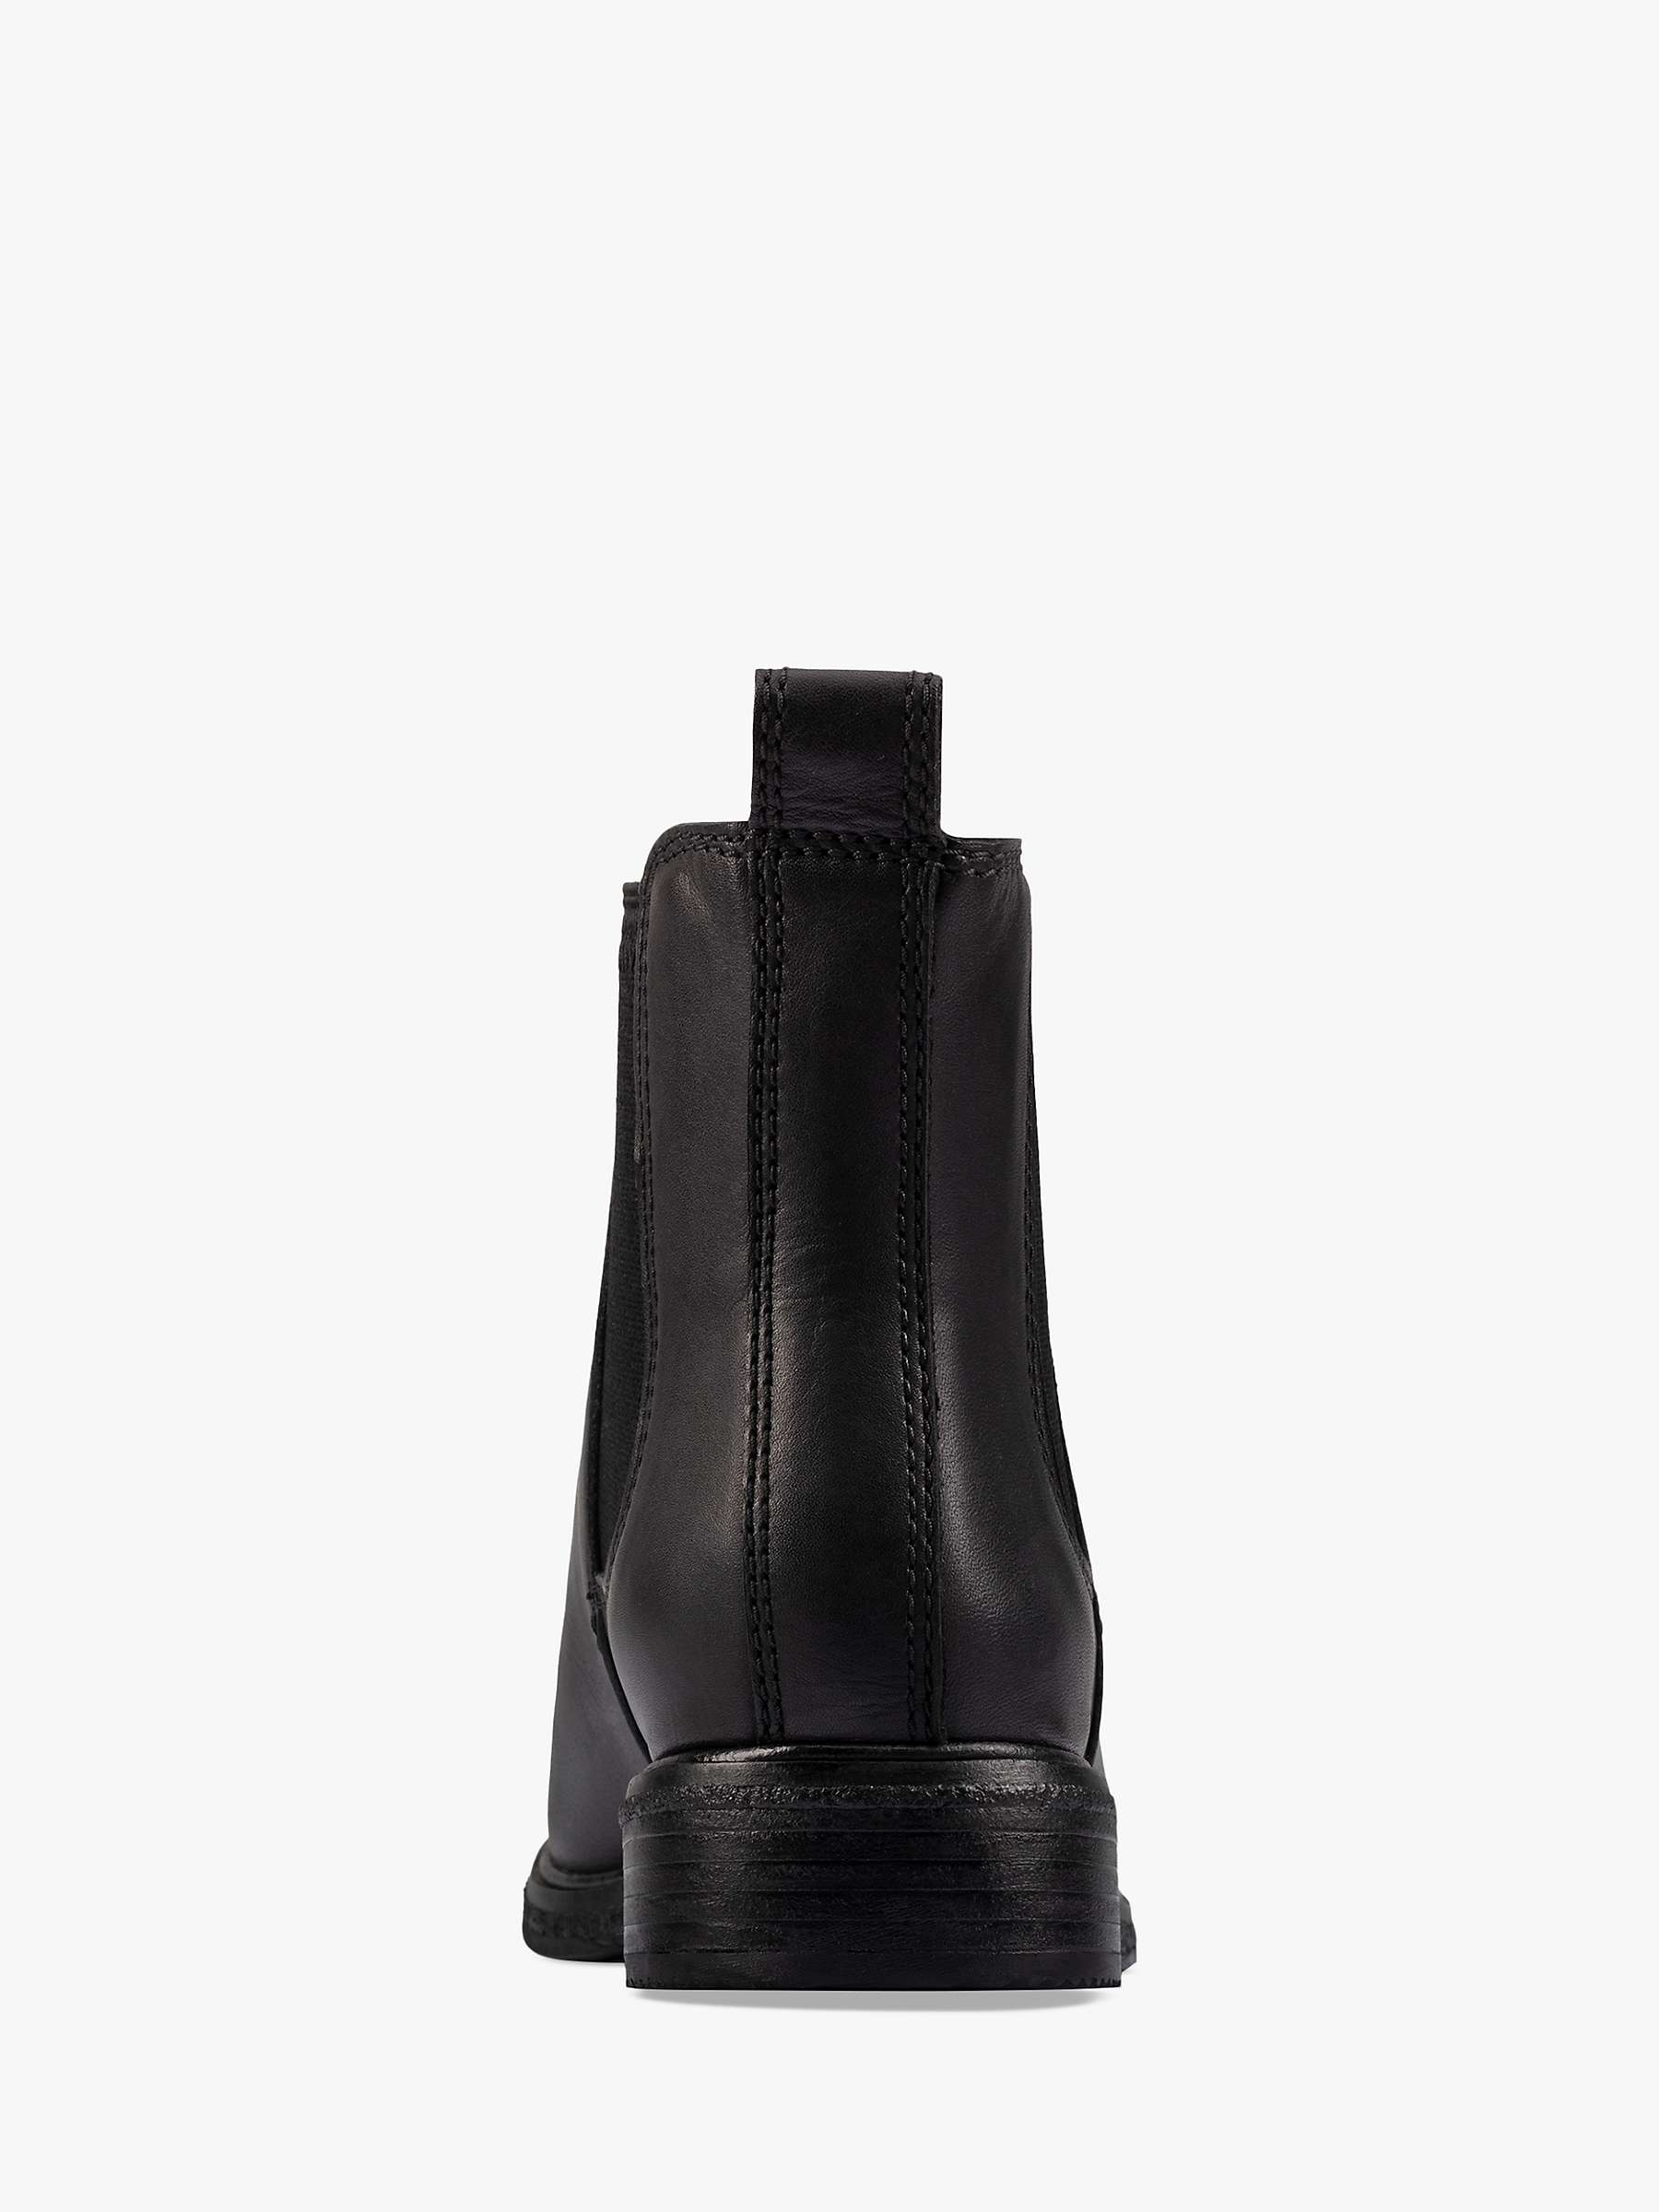 Buy Clarks Clarkdale Leather Chelsea Boots, Black Online at johnlewis.com